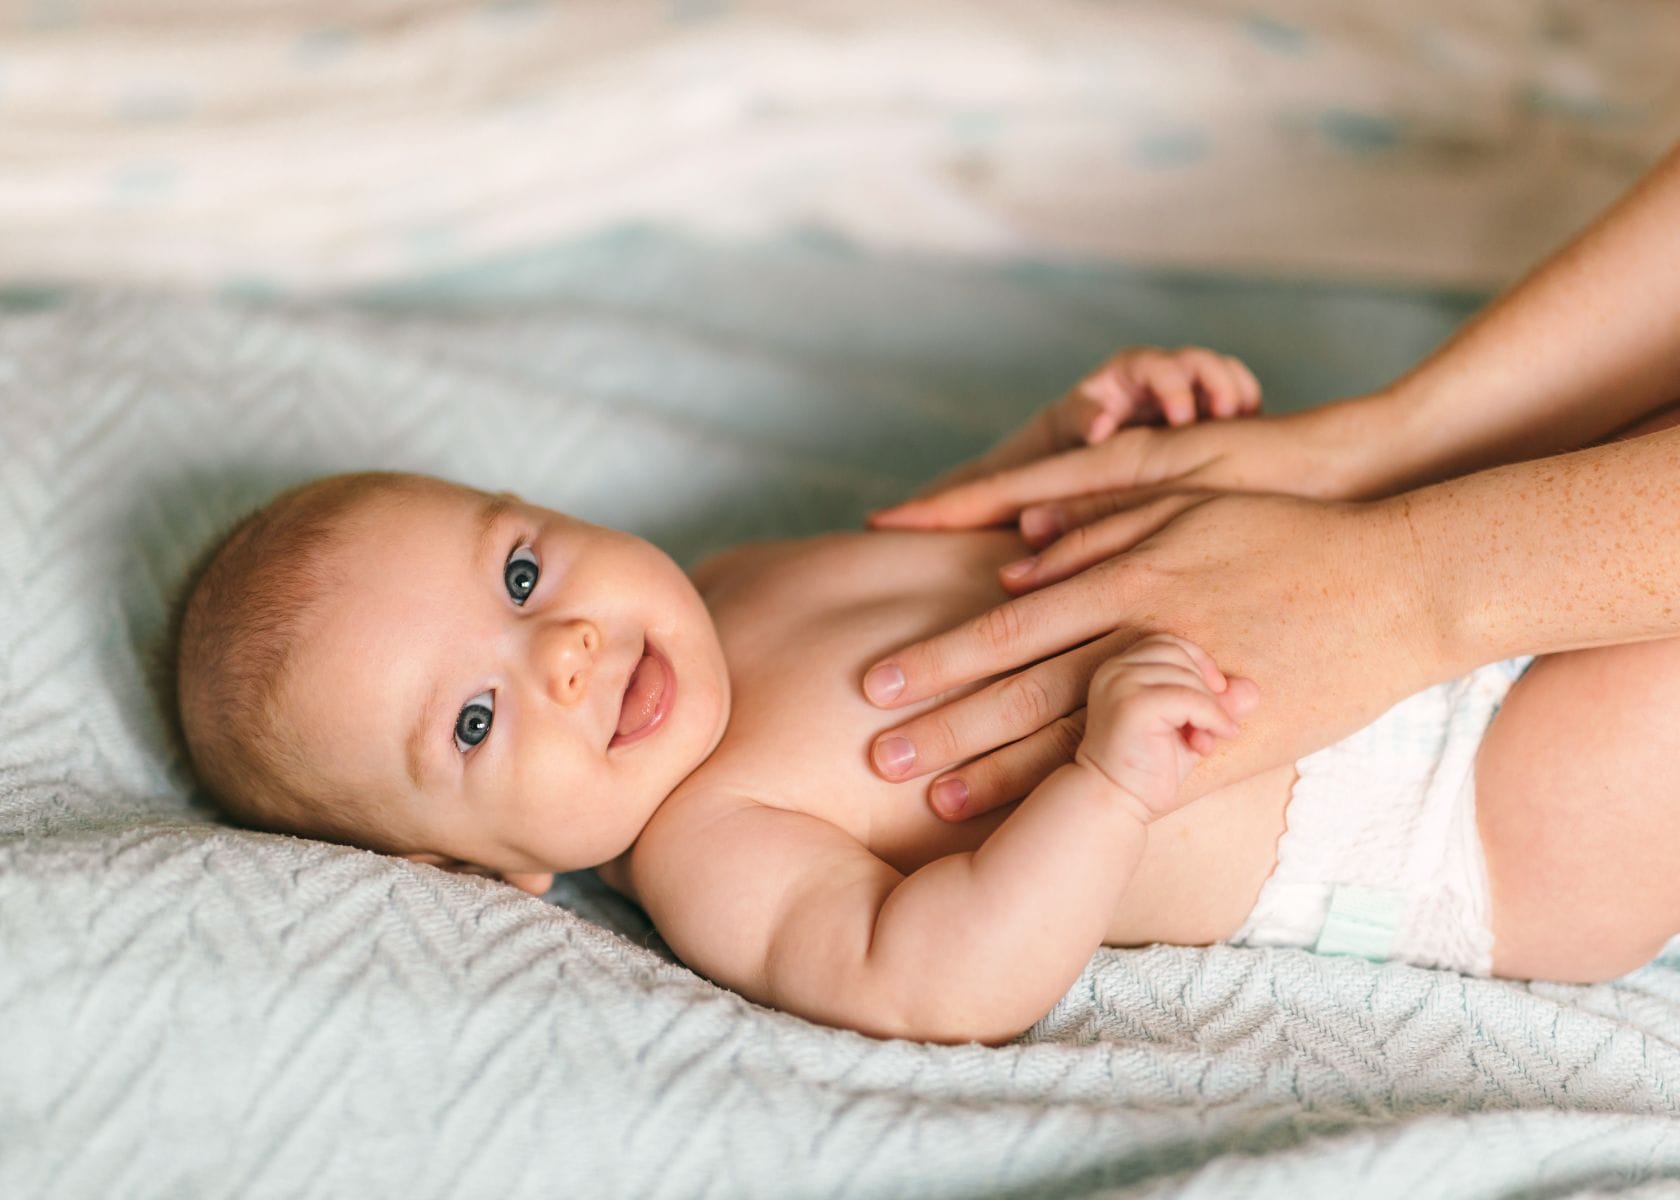 Tips for Making Your Baby's Skin Fair and Glowing